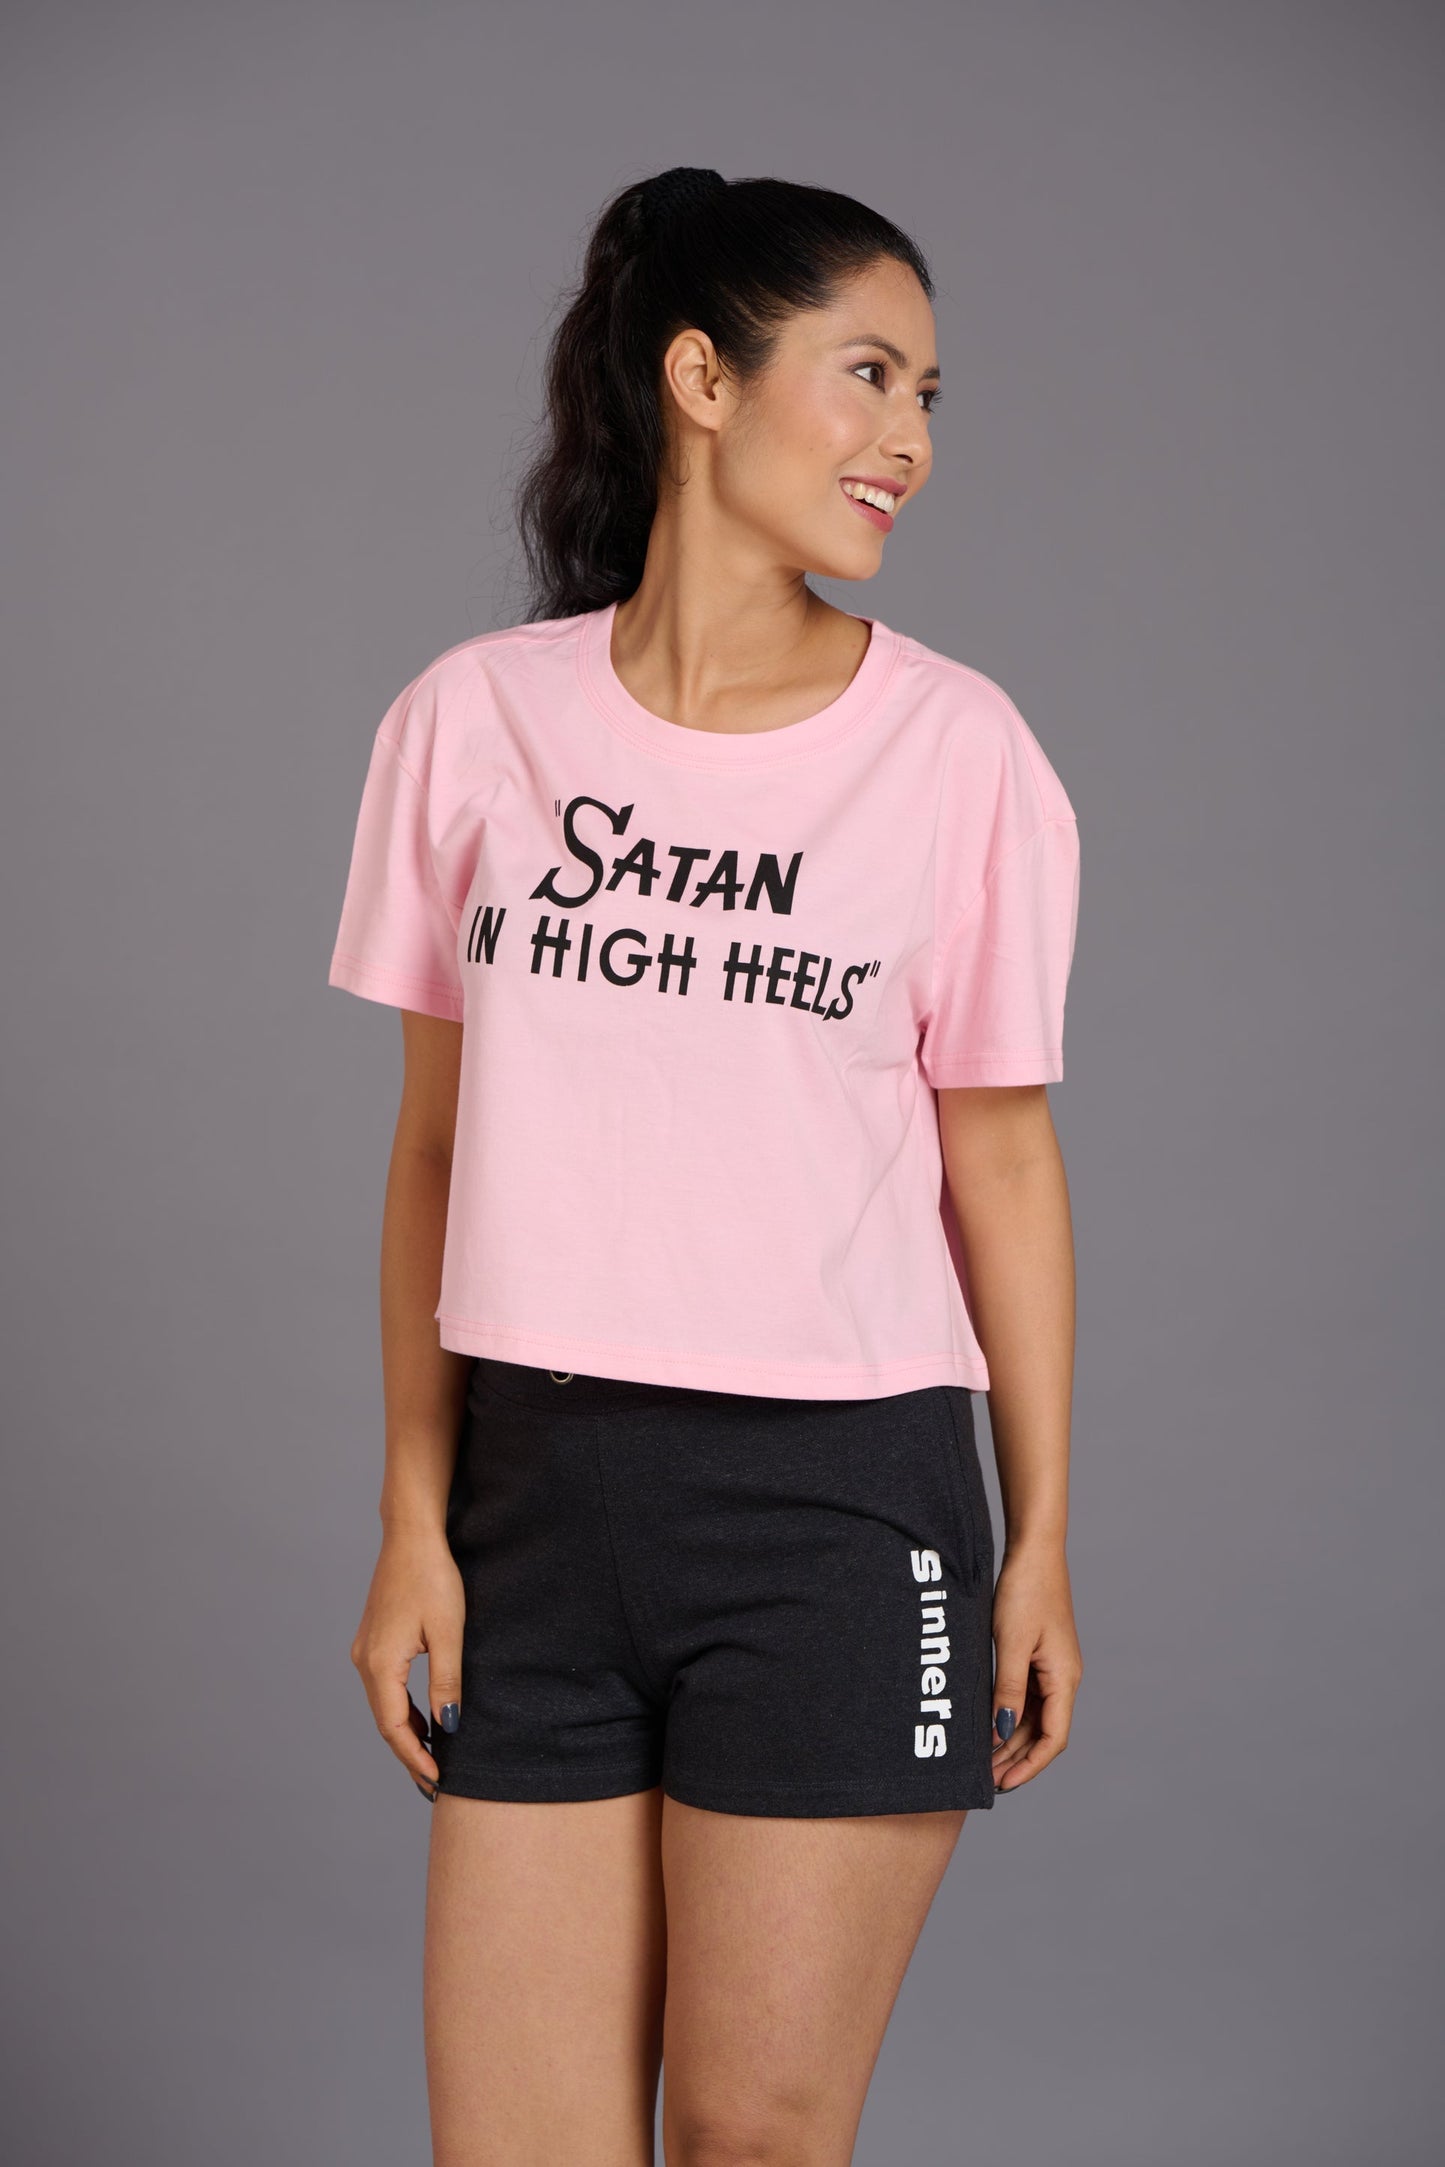 Satan In High Heels Printed Pink Oversized T-Shirt for Women